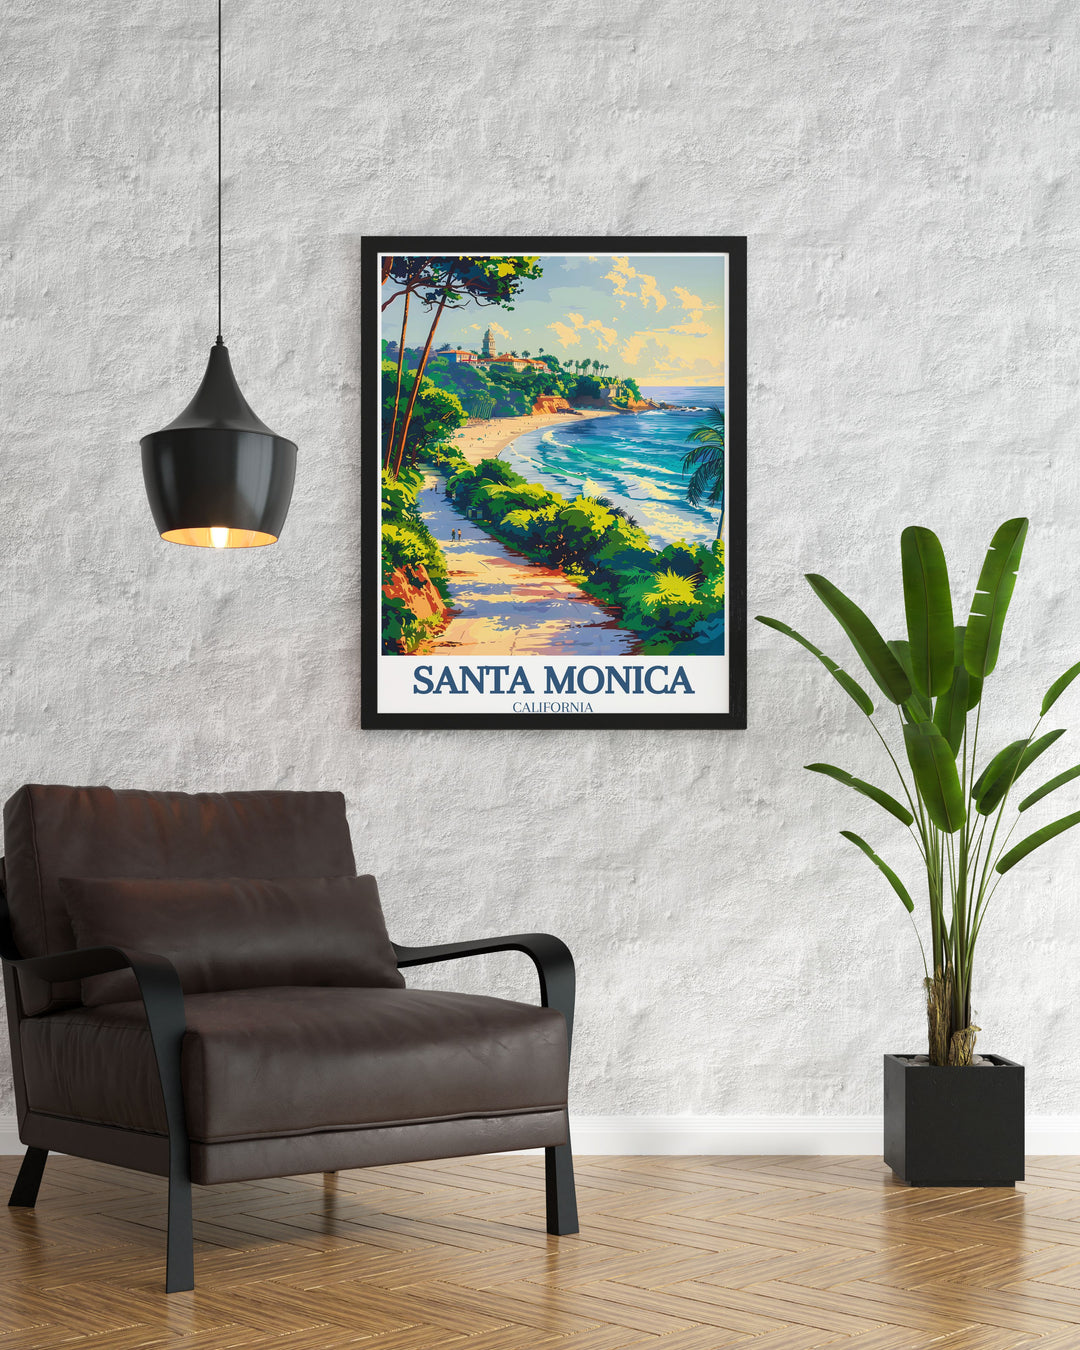 Vibrant depiction of Santa Monica, reflecting its iconic landmarks, pristine beaches, and scenic beauty. The travel poster highlights the citys natural splendor and rich history.